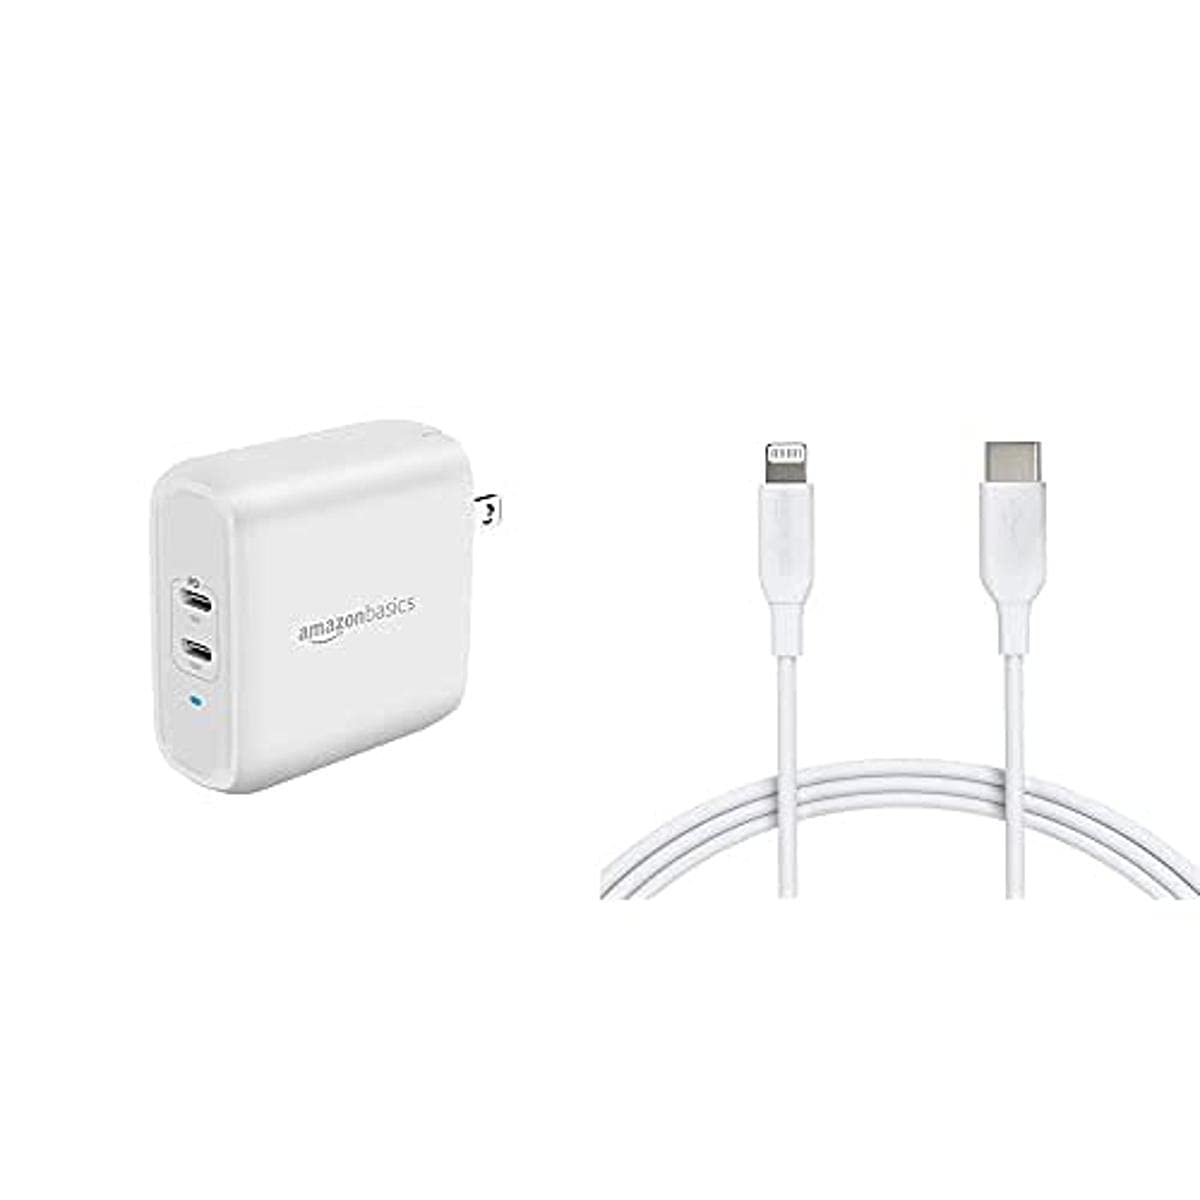 Amazon Basics USB-C Lightning Cable and USB-C Wall Charger Combo, Mfi Certified Charger for Apple iPhone 11, 12, iPad - 6ft White